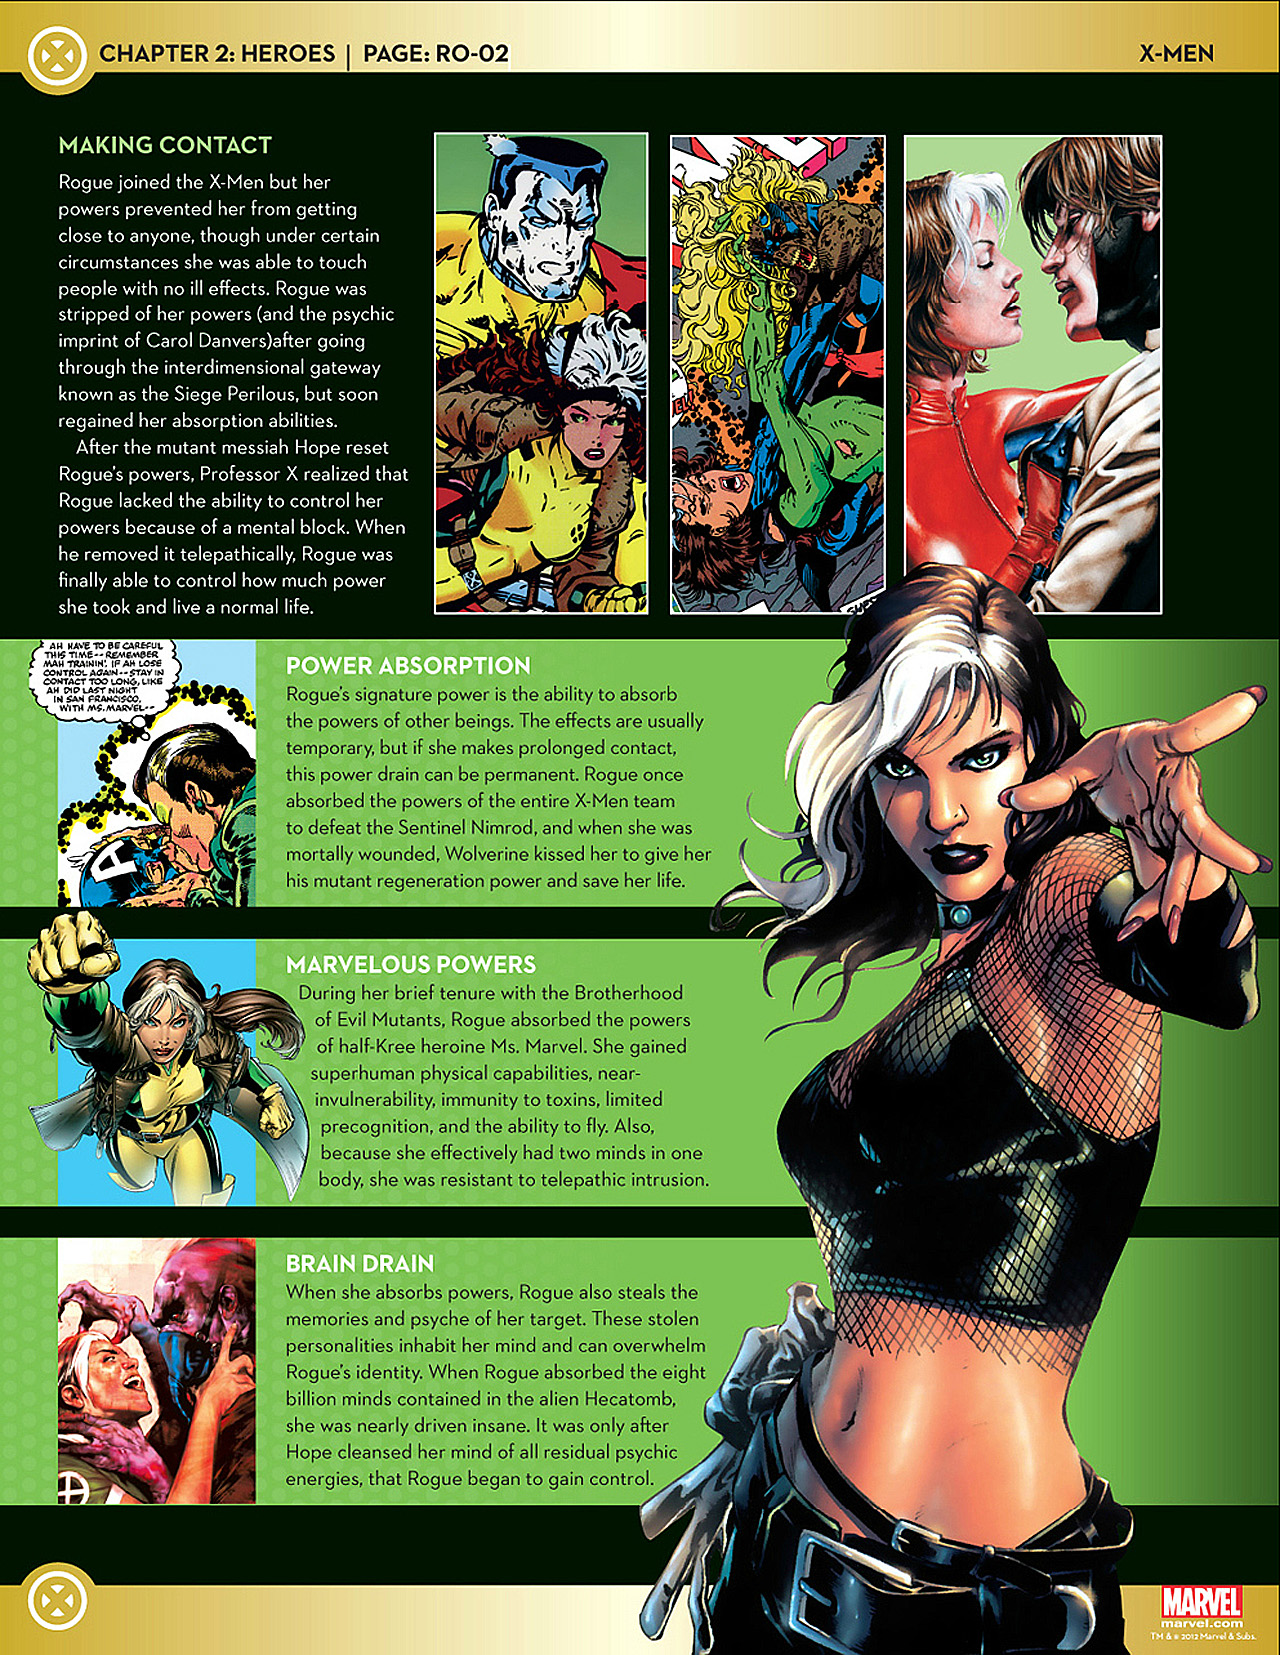 Read online Marvel Fact Files comic -  Issue #2 - 23